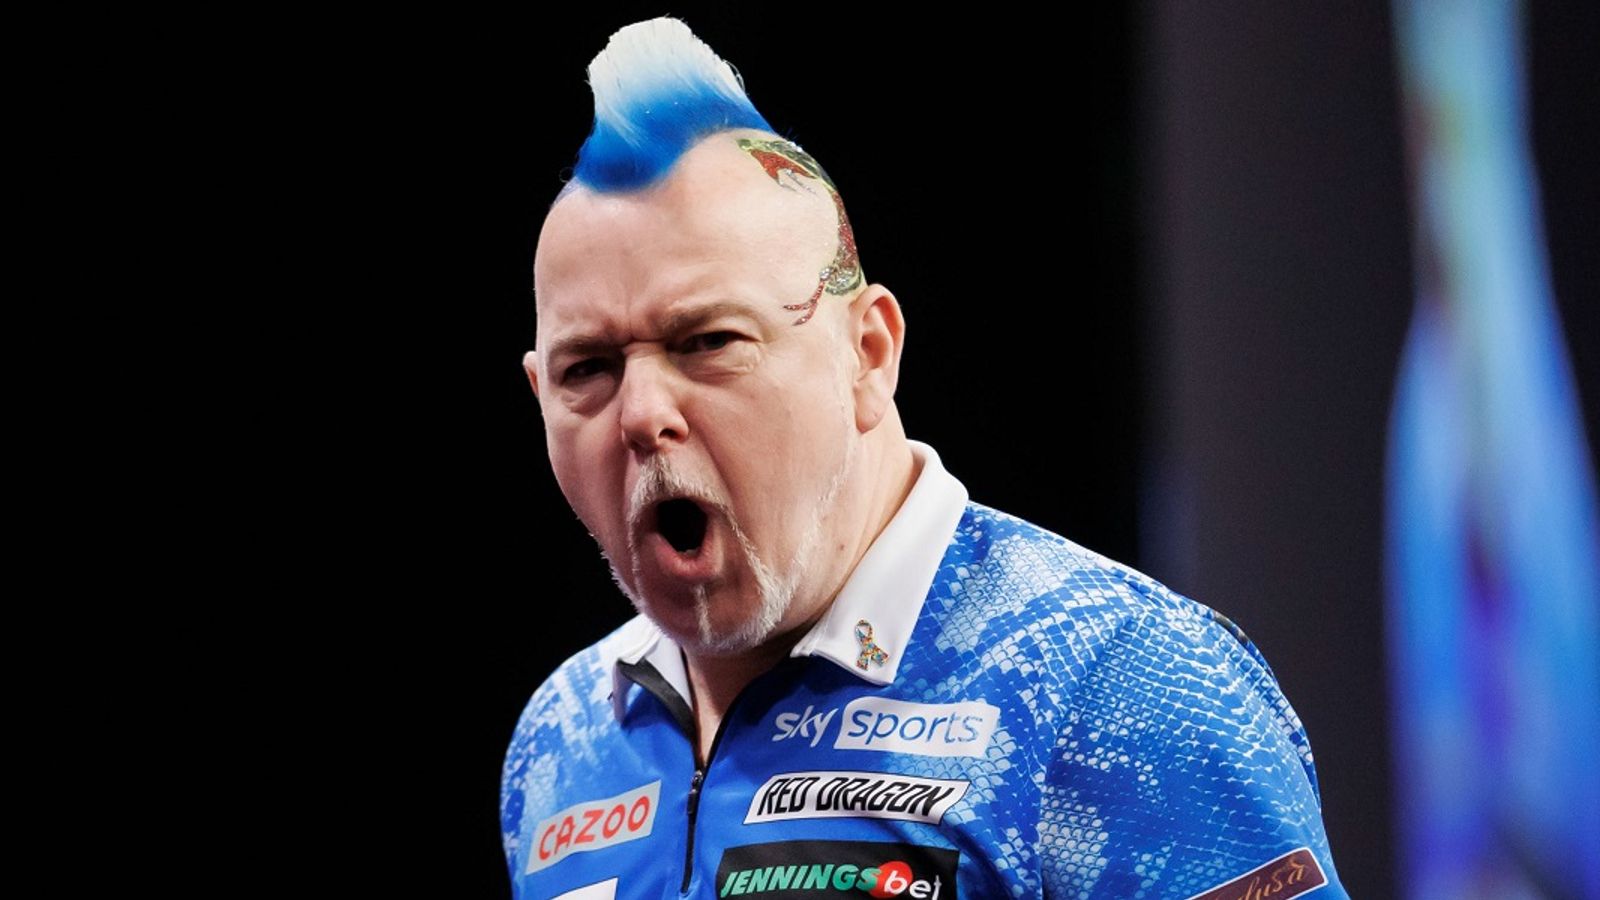 World Matchplay: Peter Wright hoping his gallstones don’t flare up ahead of title defence